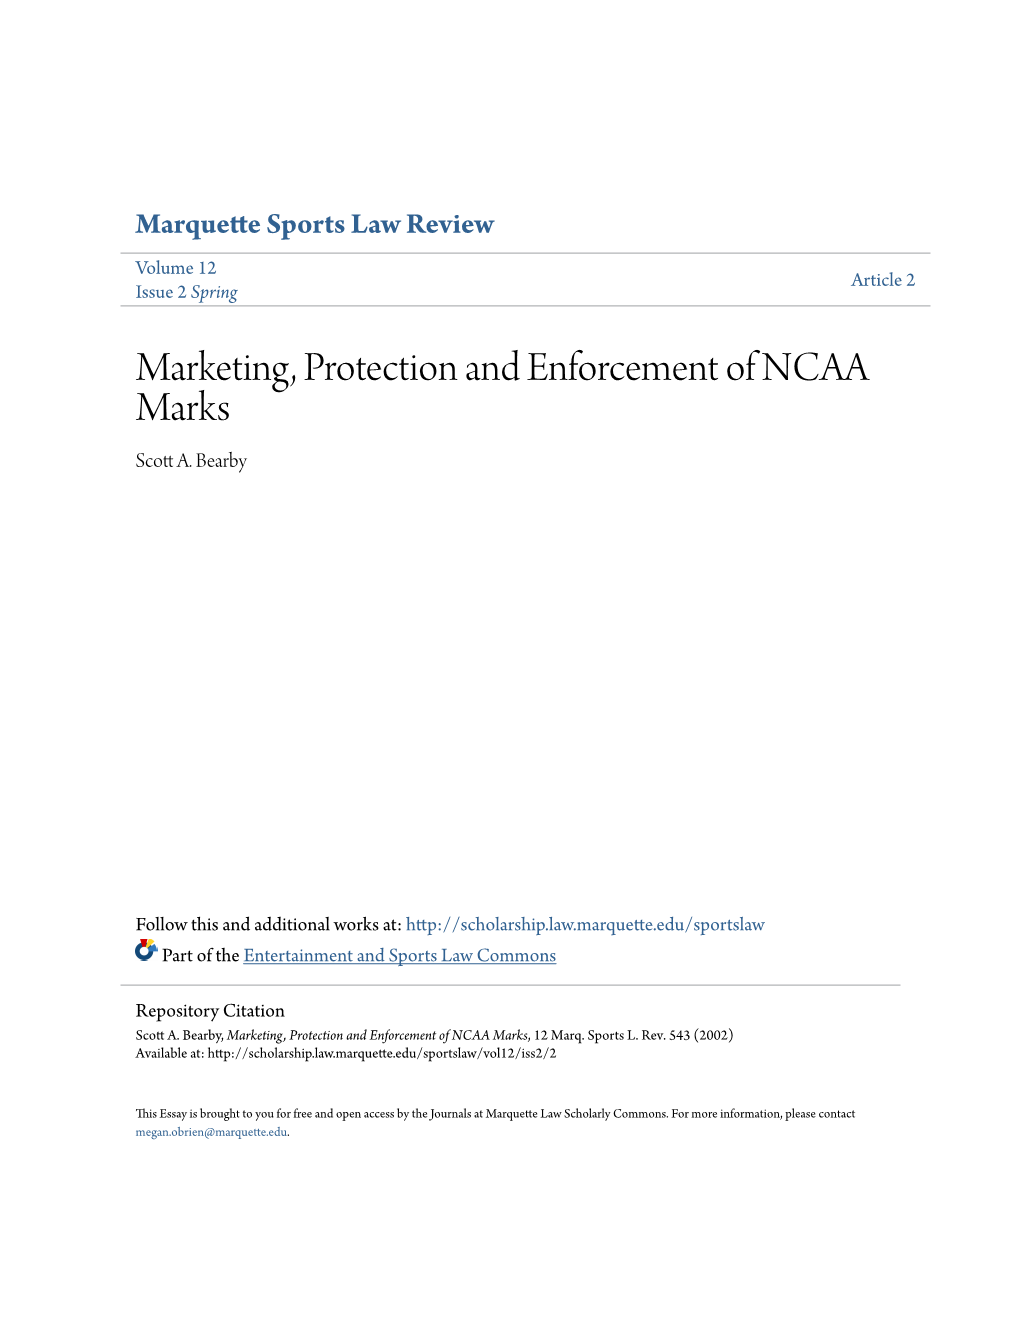 Marketing, Protection and Enforcement of NCAA Marks Scott A